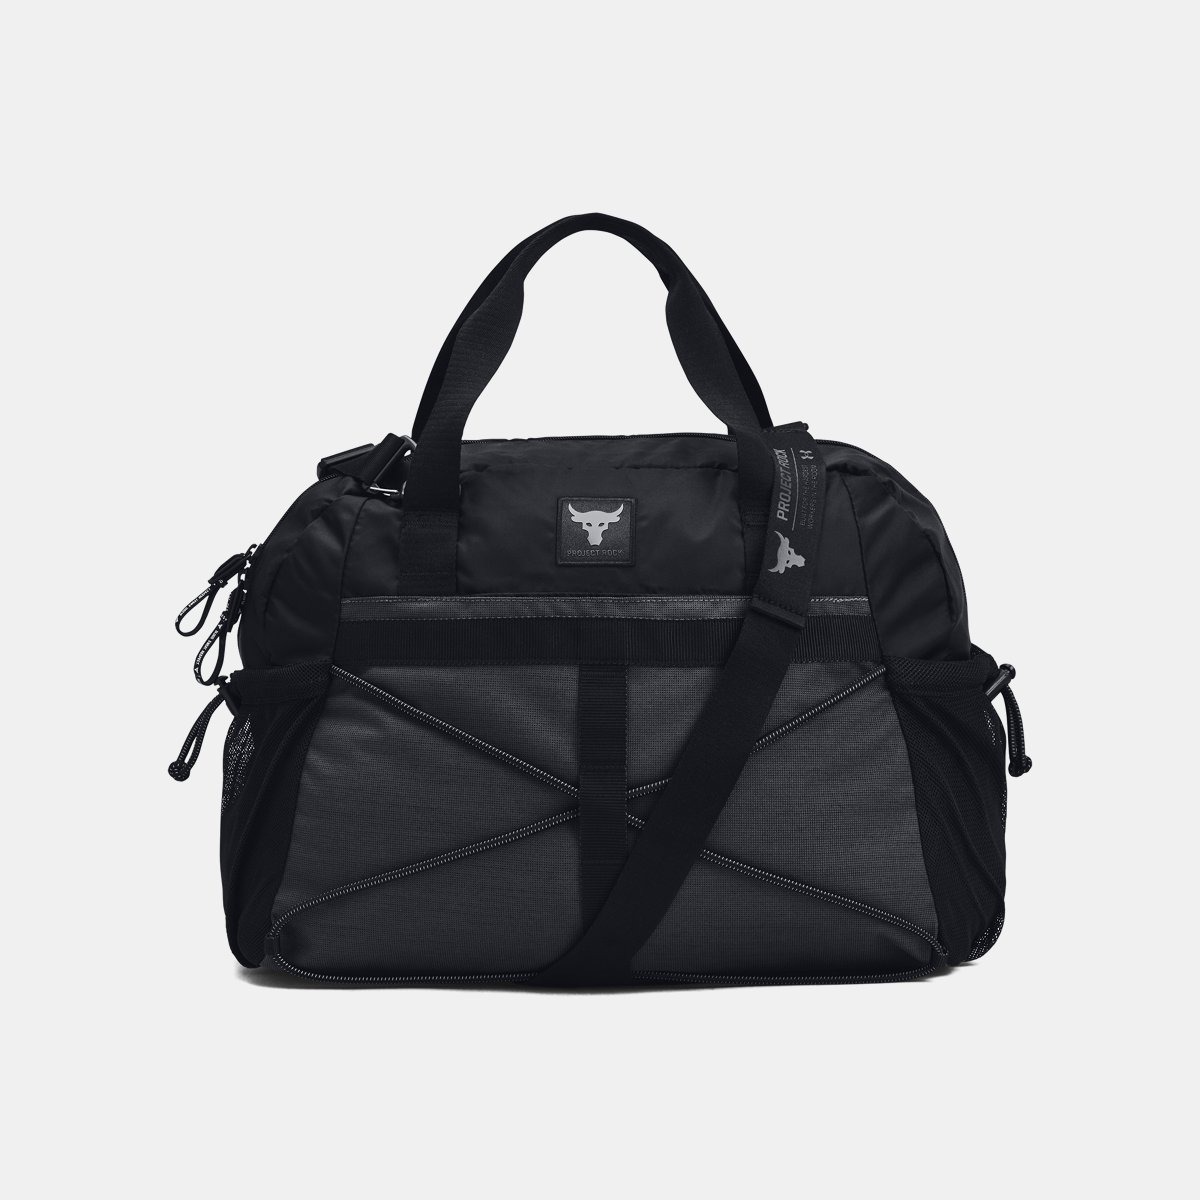 Ladies Bag in Black from Under Armour GOOFASH